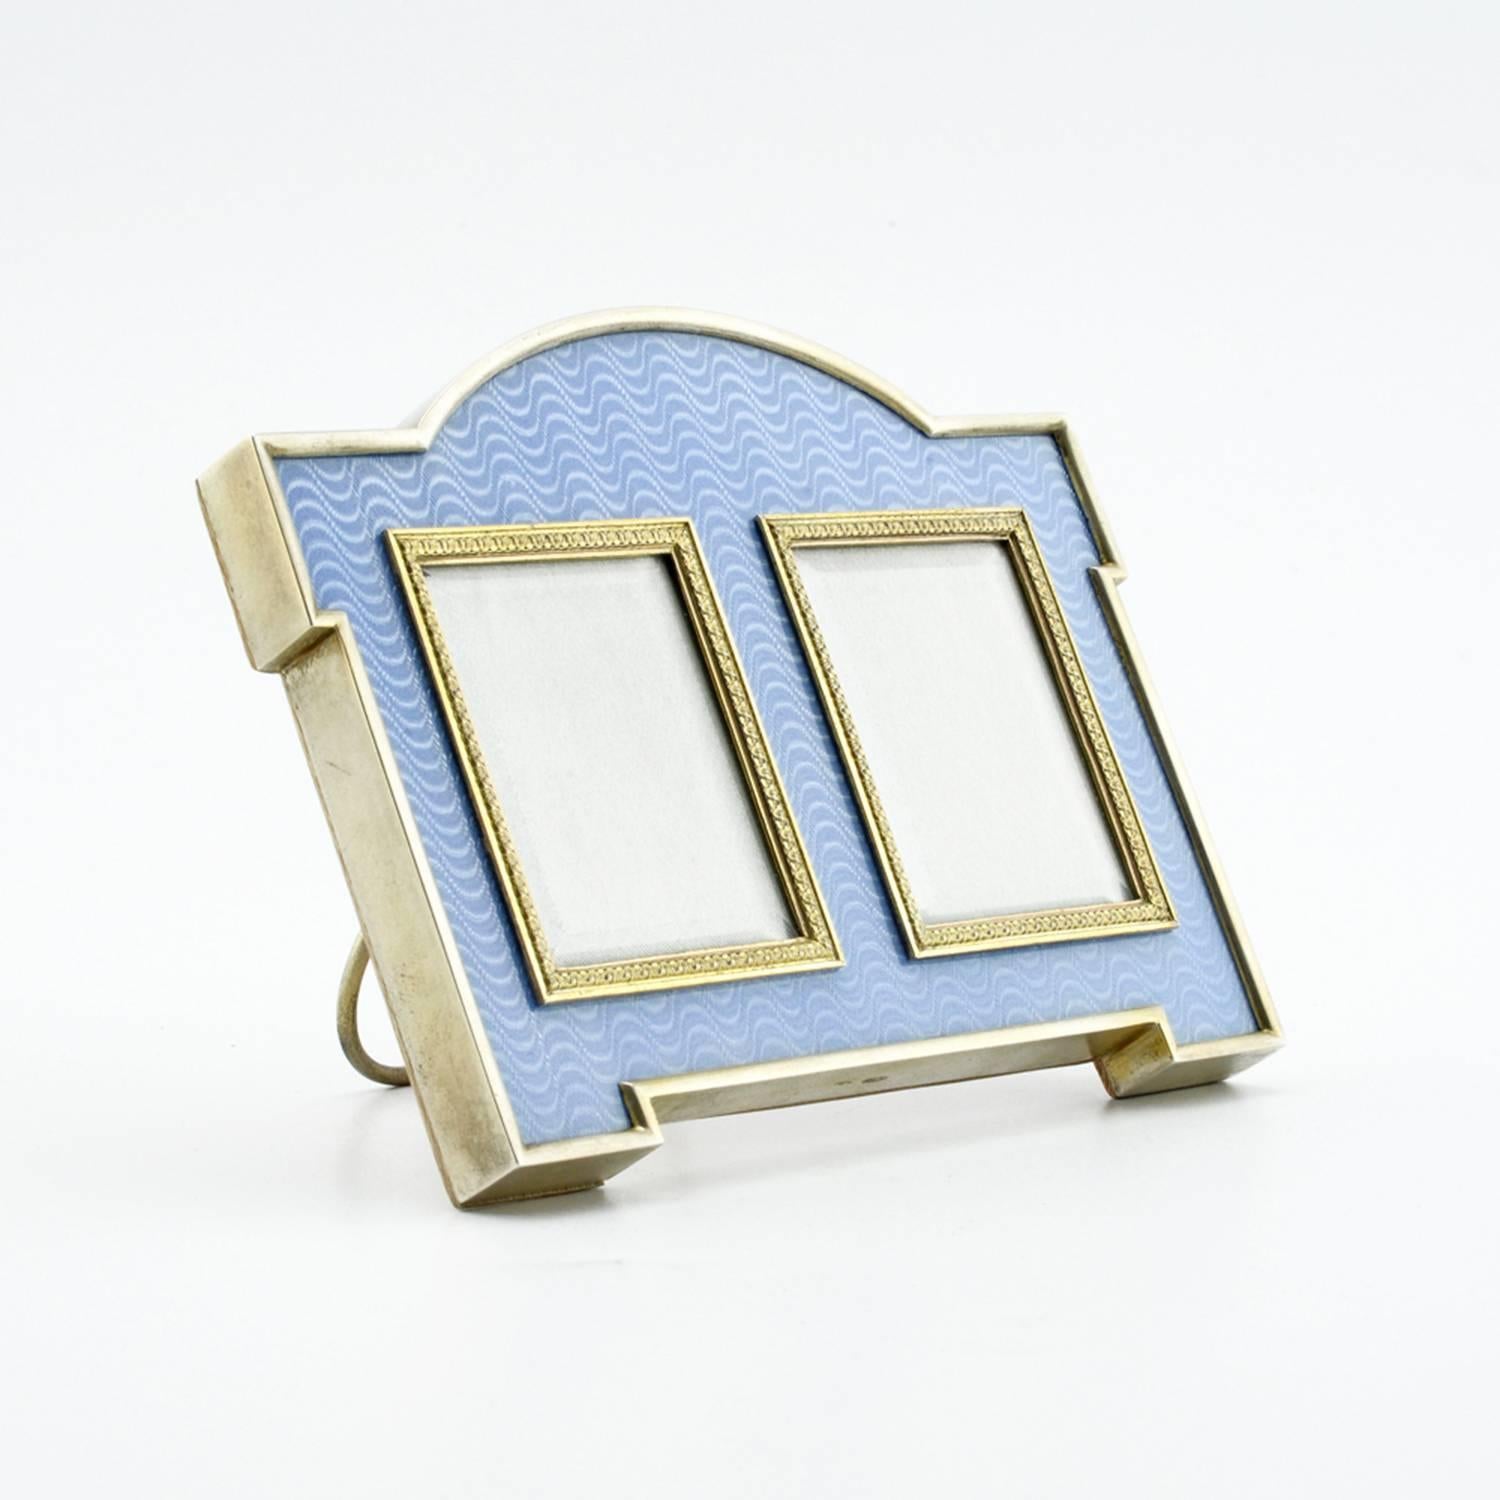 A Fabergé gilded silver and guilloché enamel double aperture photograph frame, workmaster Karl Gustaf Hjalmar Armfelt, St. Petersburg, circa 1904-1908. Shaped rectangular with bracket feet, the two rectangular apertures with leaf tip bezels,